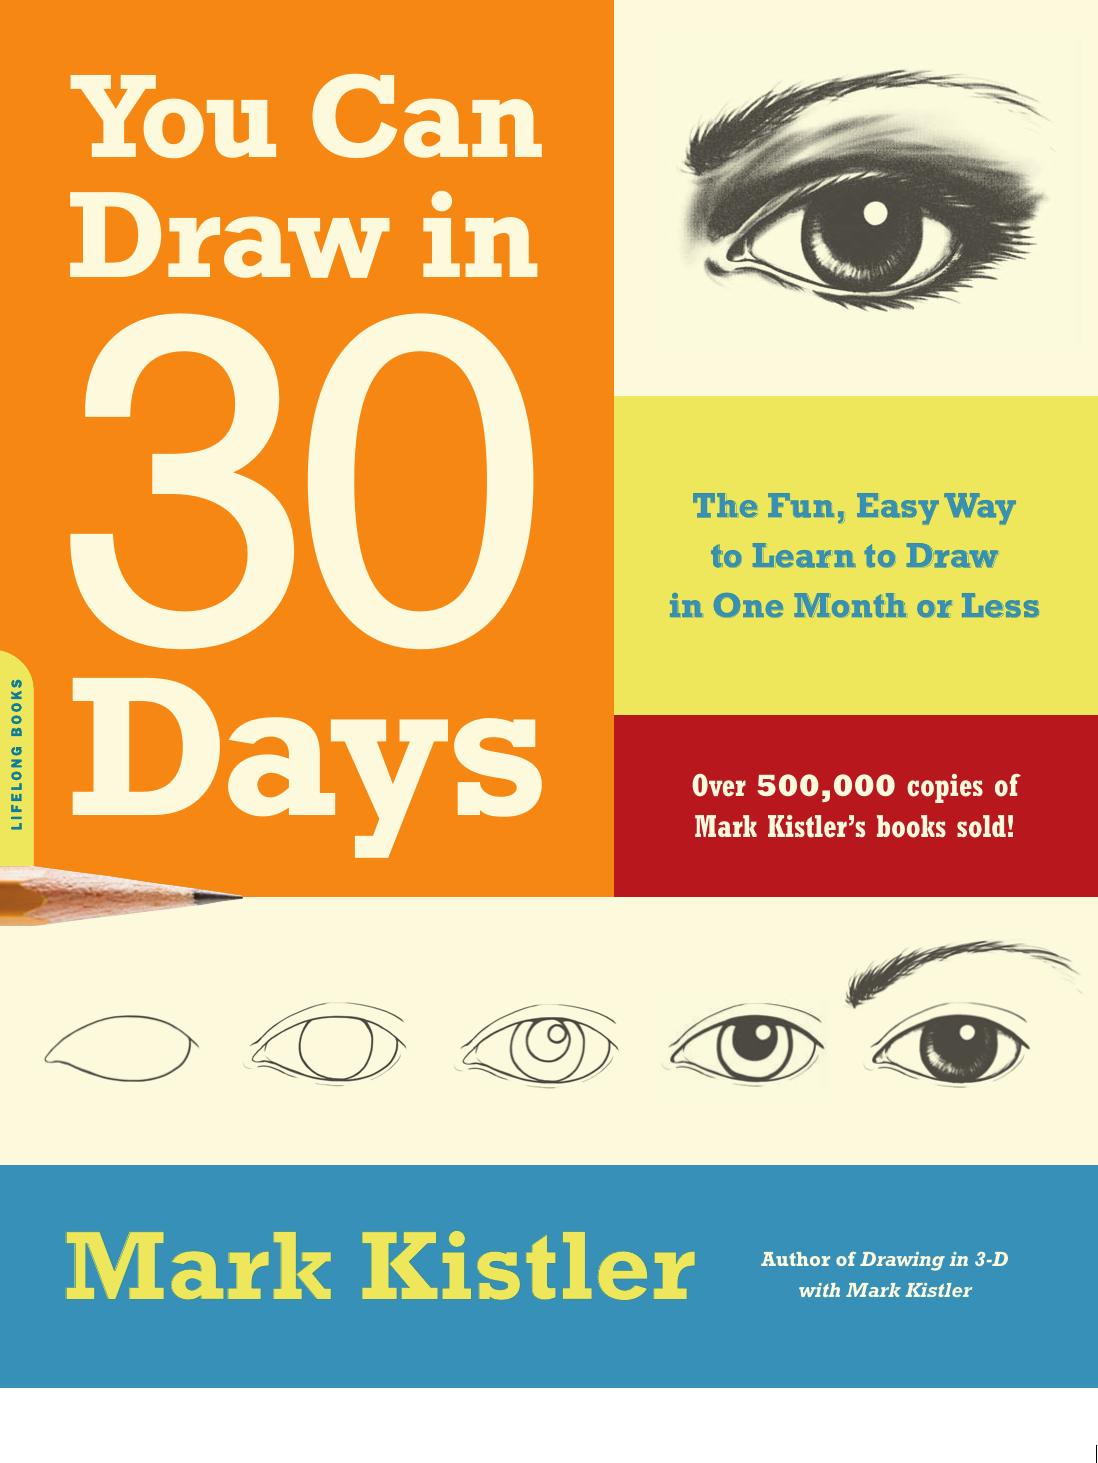 You Can Draw in 30 Days The Fun, Easy Way 2016